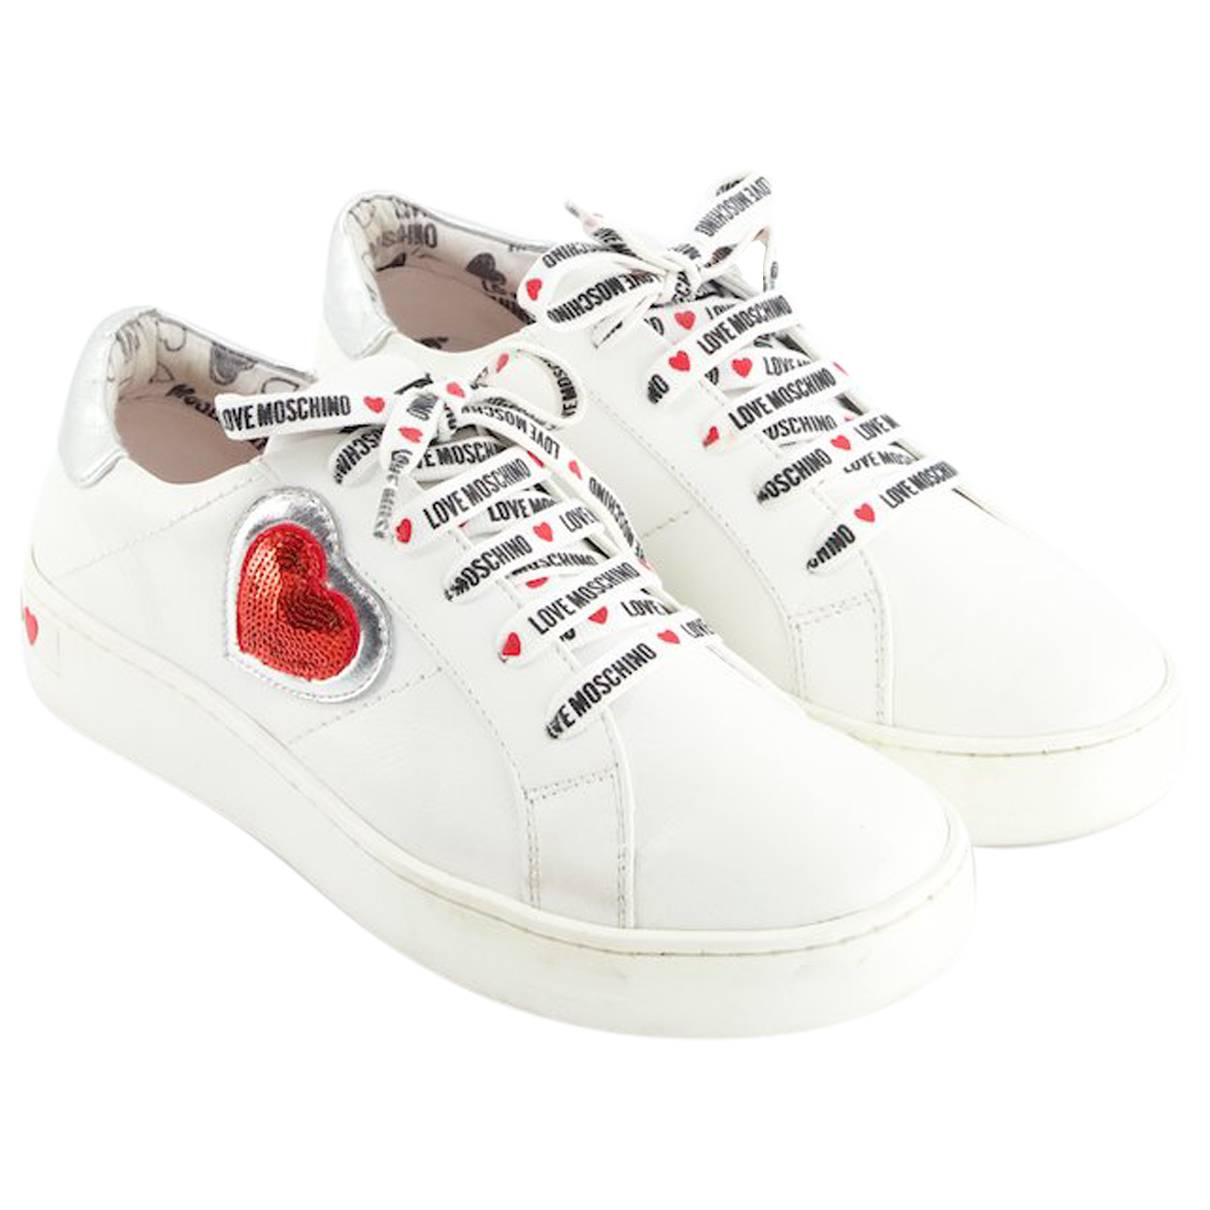 Leather trainers Moschino Love